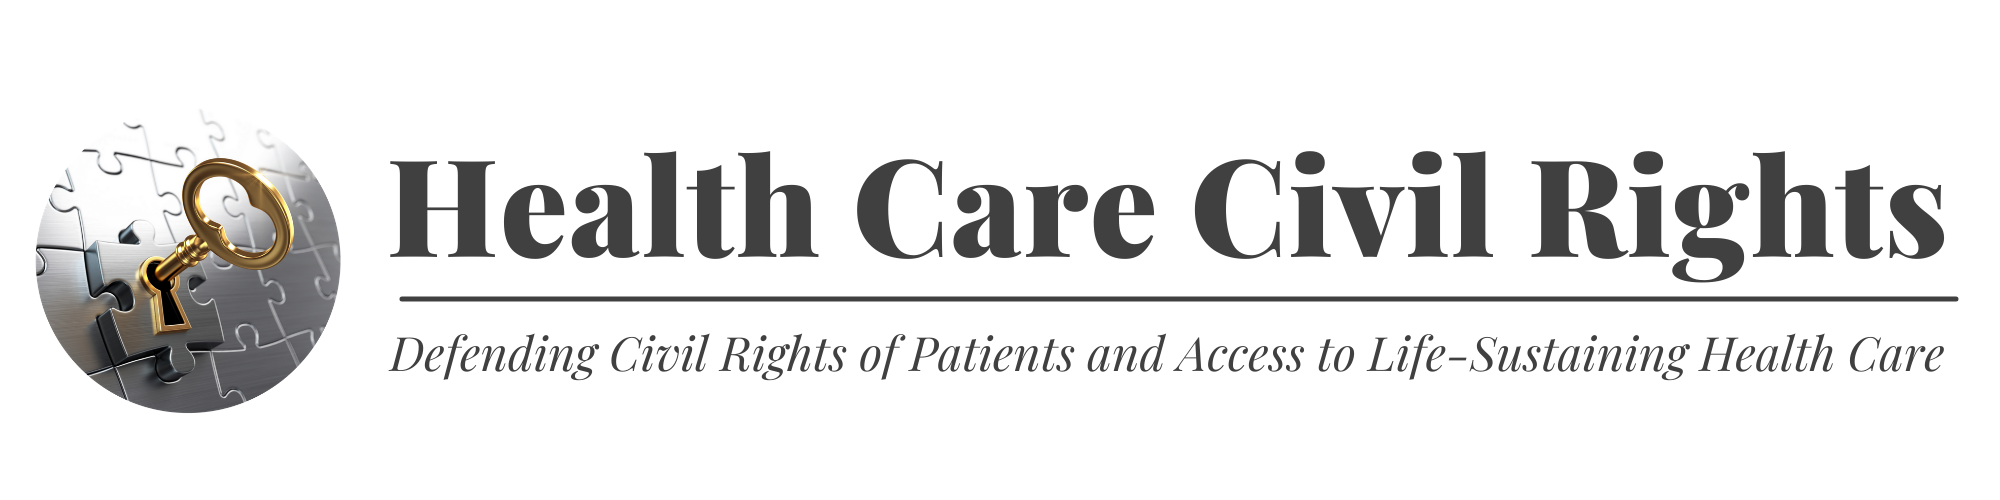 Health Care Civil Rights Task Force